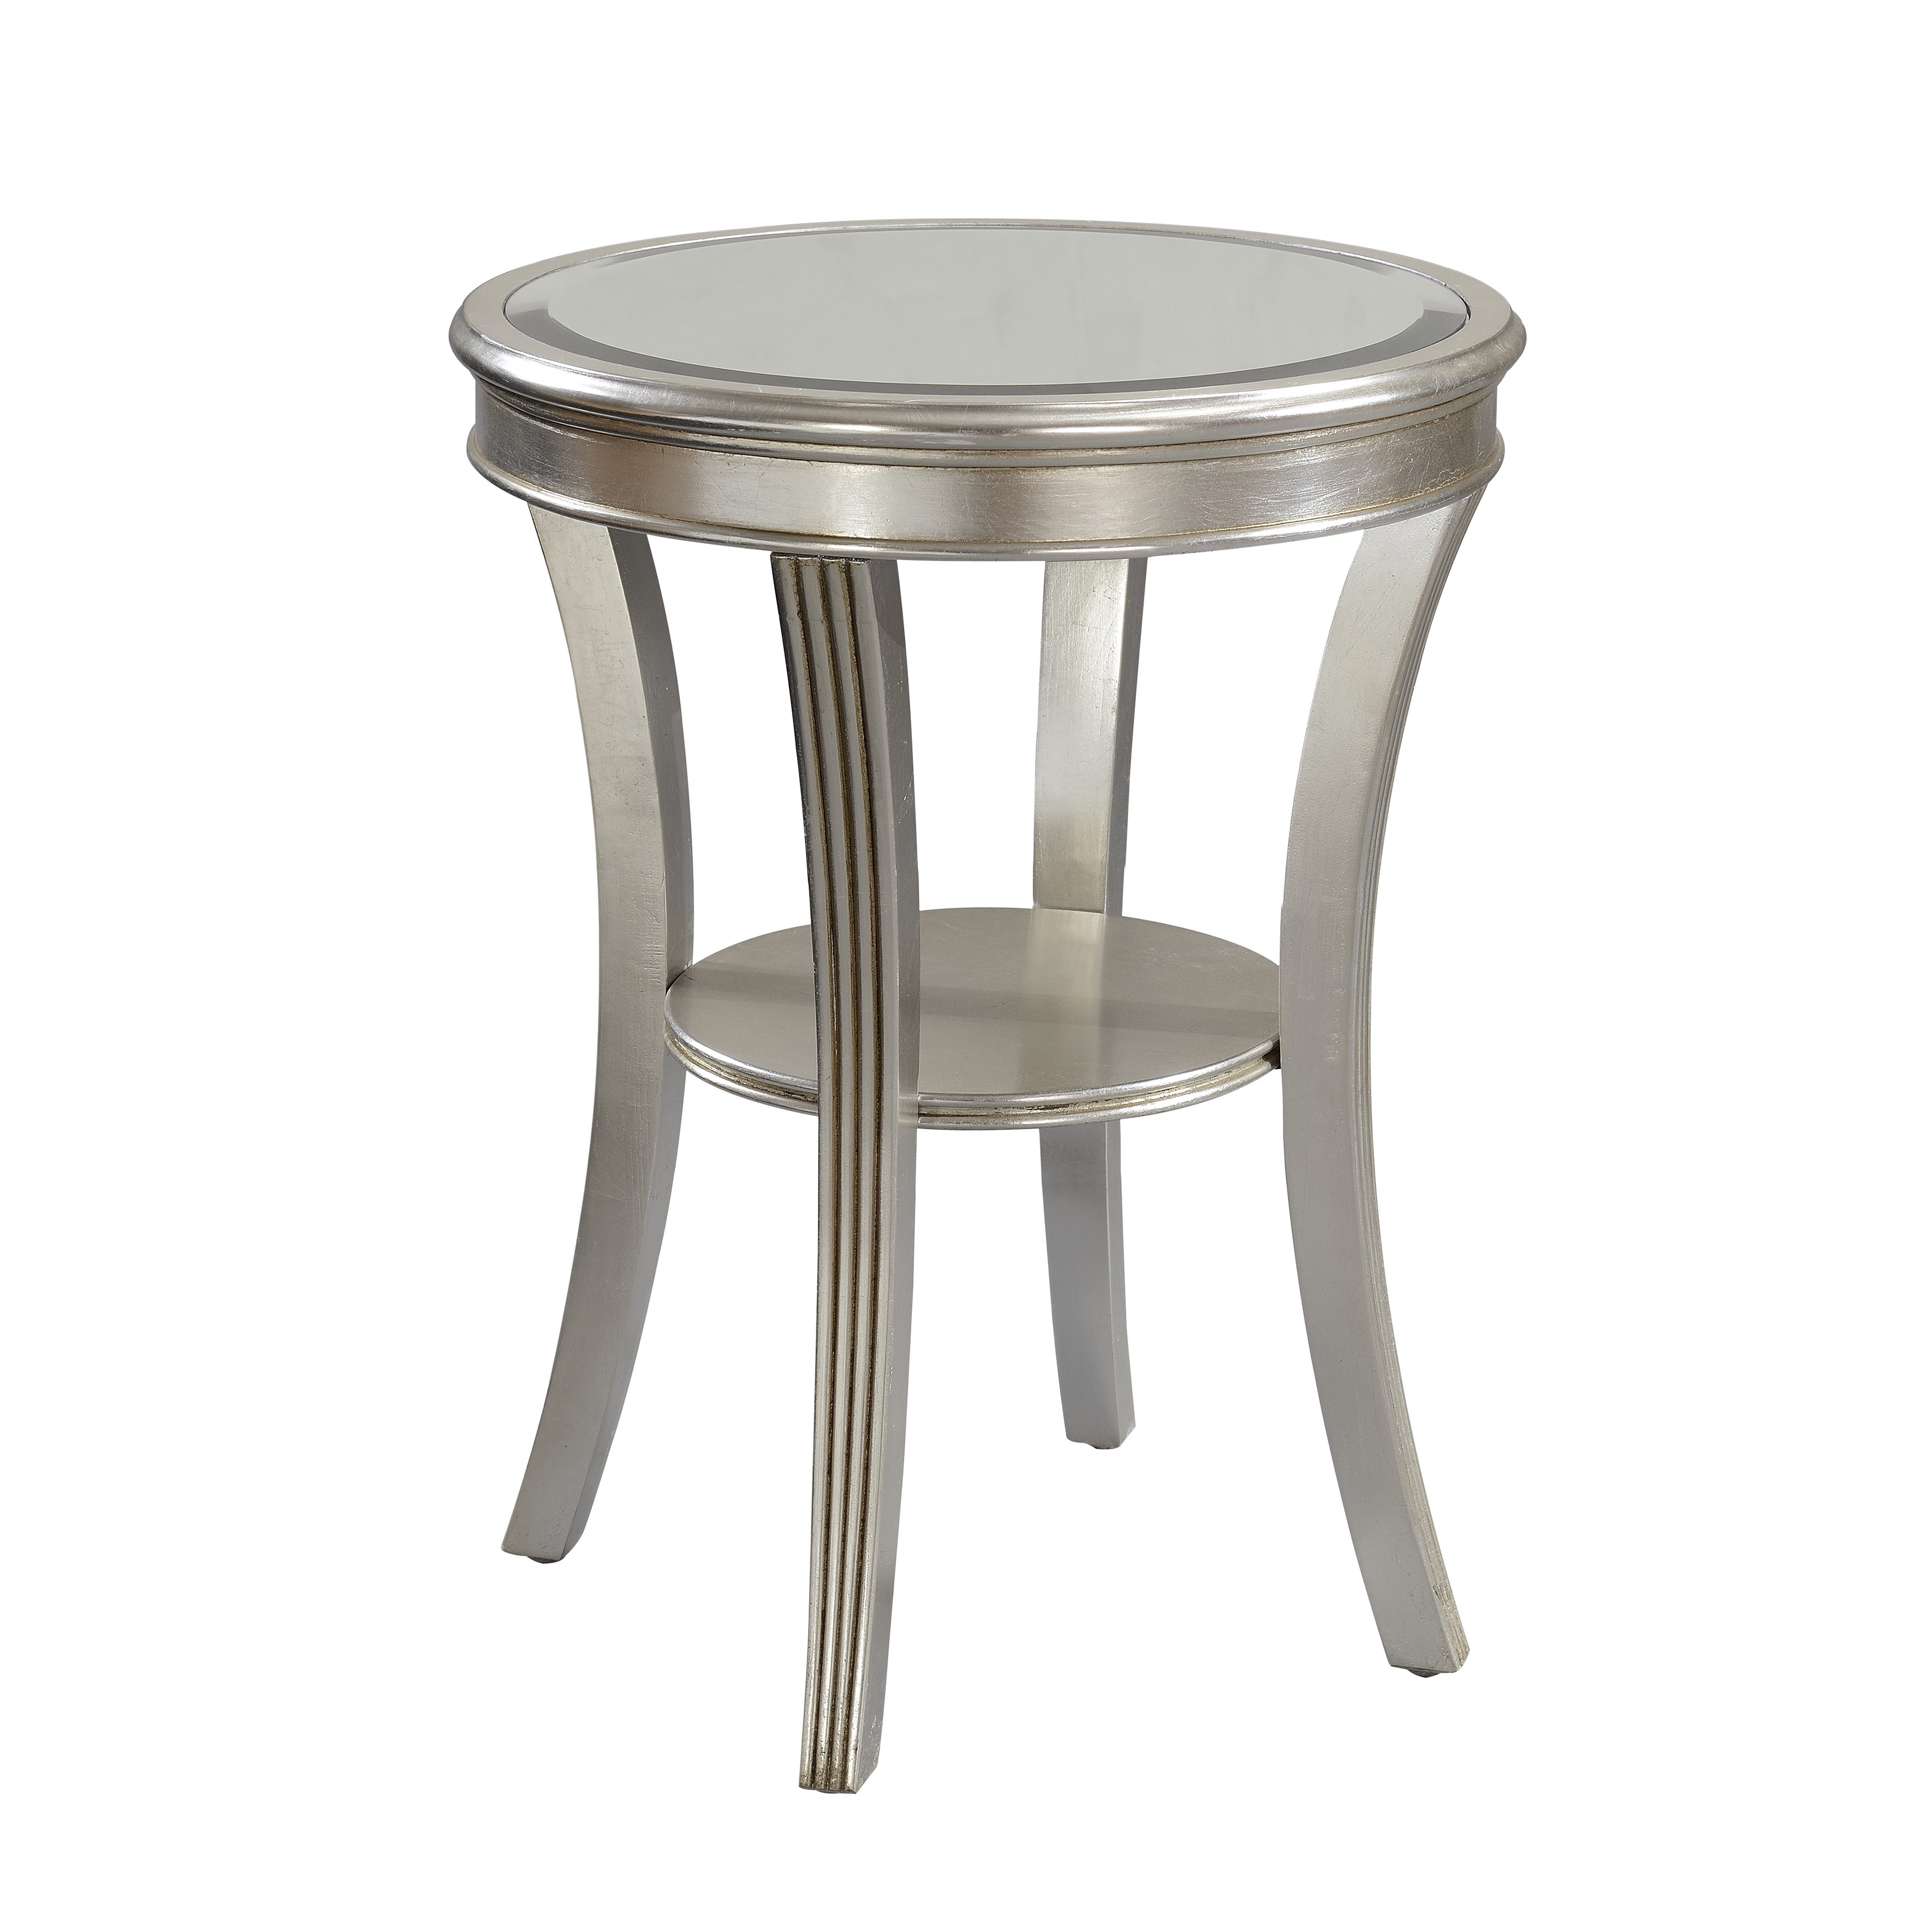 christopher knight home round silver accent table free small shipping today skirts decorator low wood coffee target black backyard furniture battery operated living room lamps